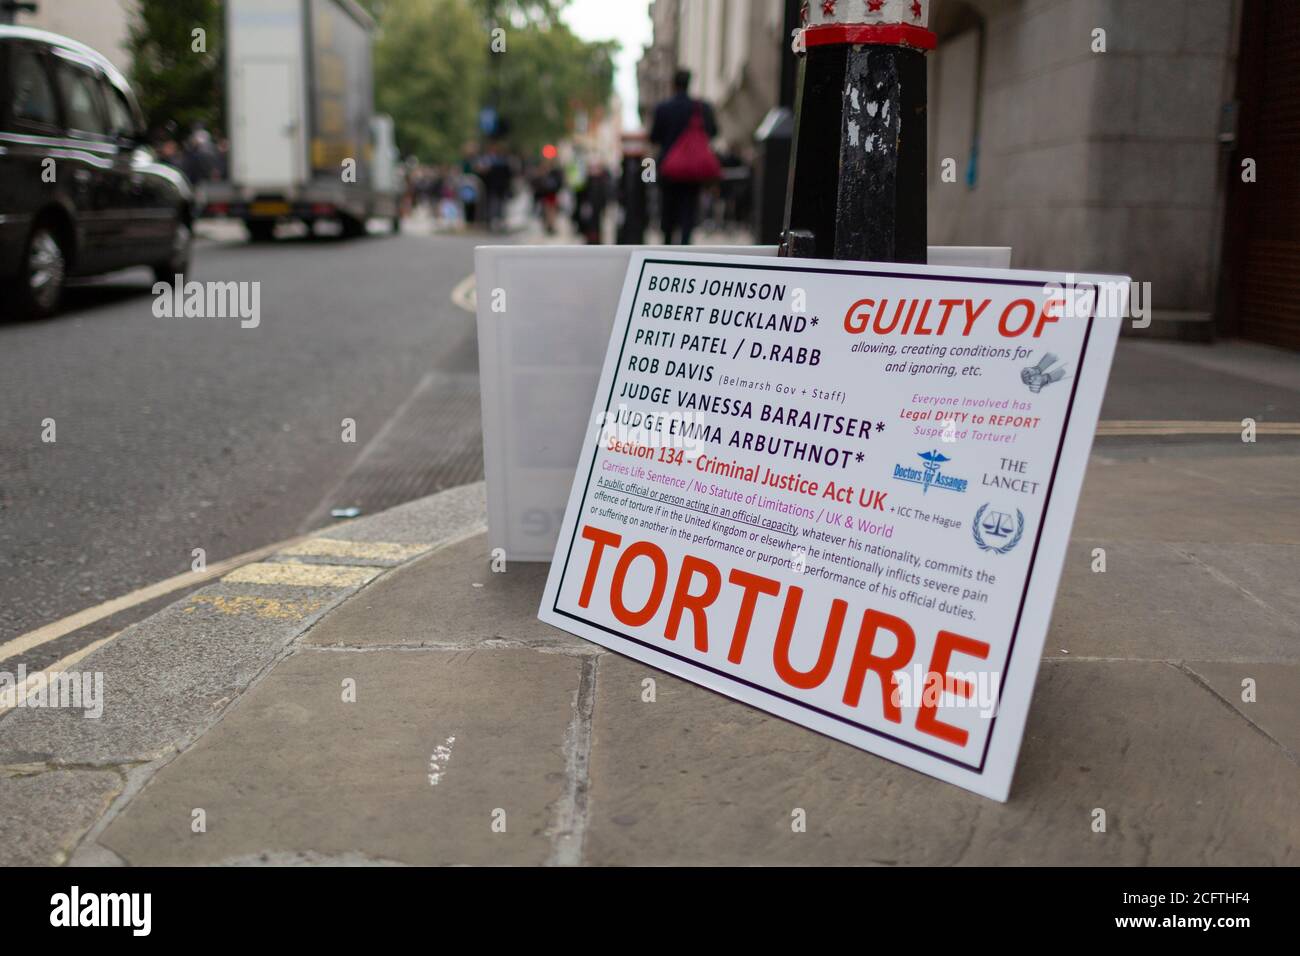 Protest placard outside Old Bailey criminal court, extradition hearing for Julian Assange, London, 7 September 2020 Stock Photo